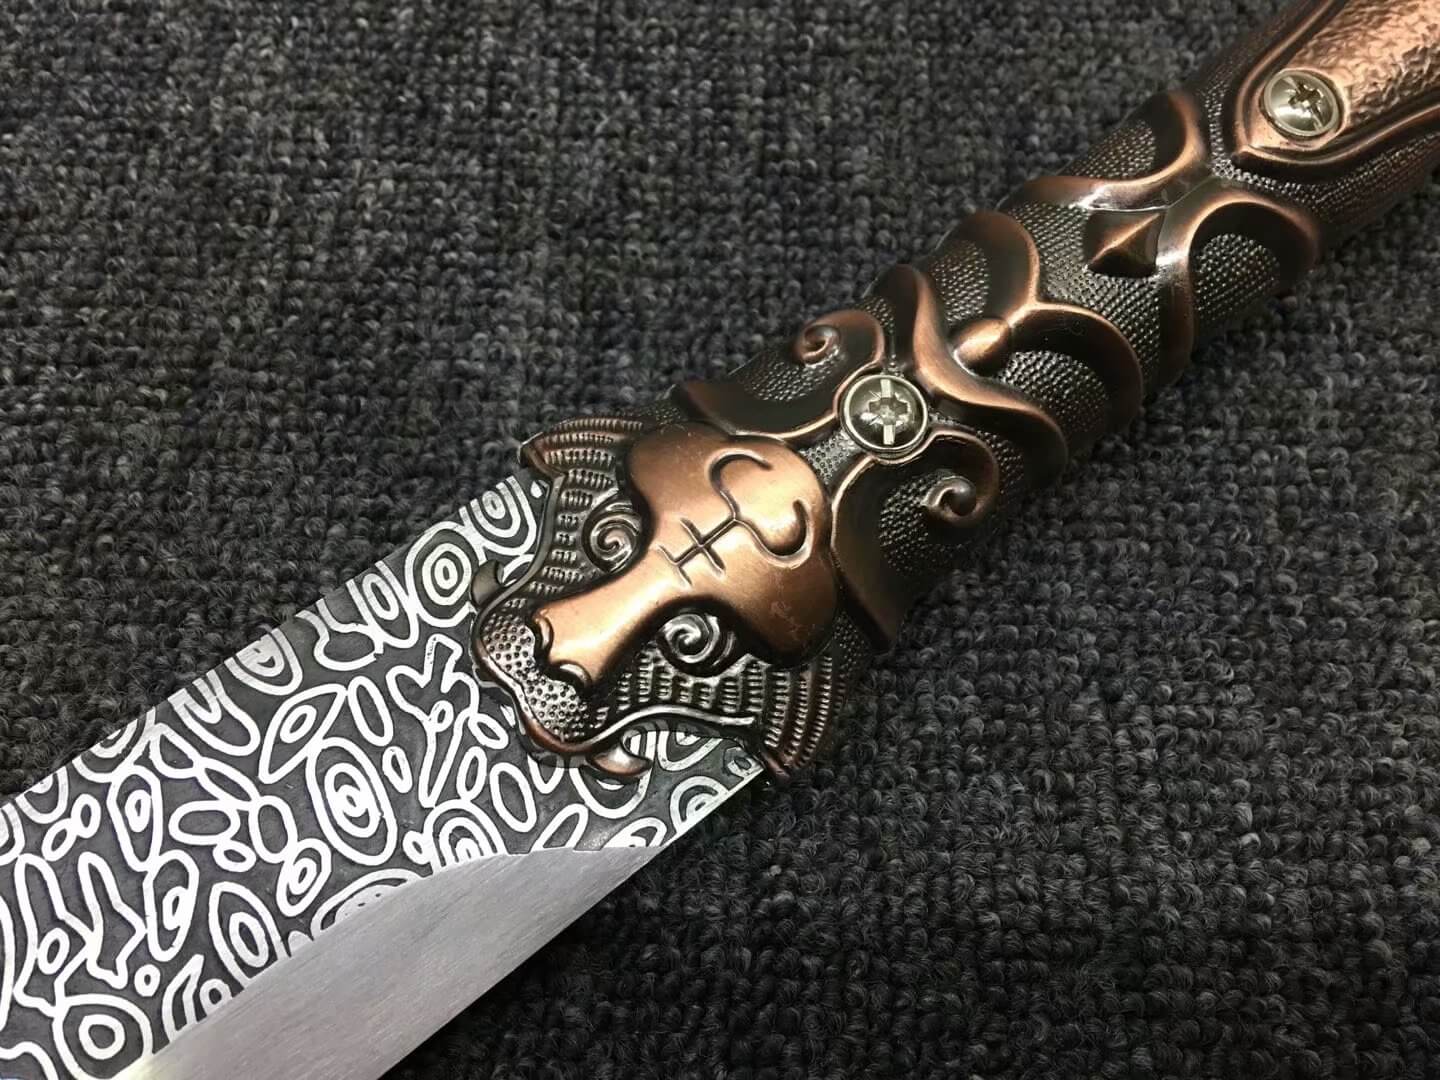 Hacking knife,High carbon steel etching blade,Leather scabbard,Alloy - Chinese sword shop